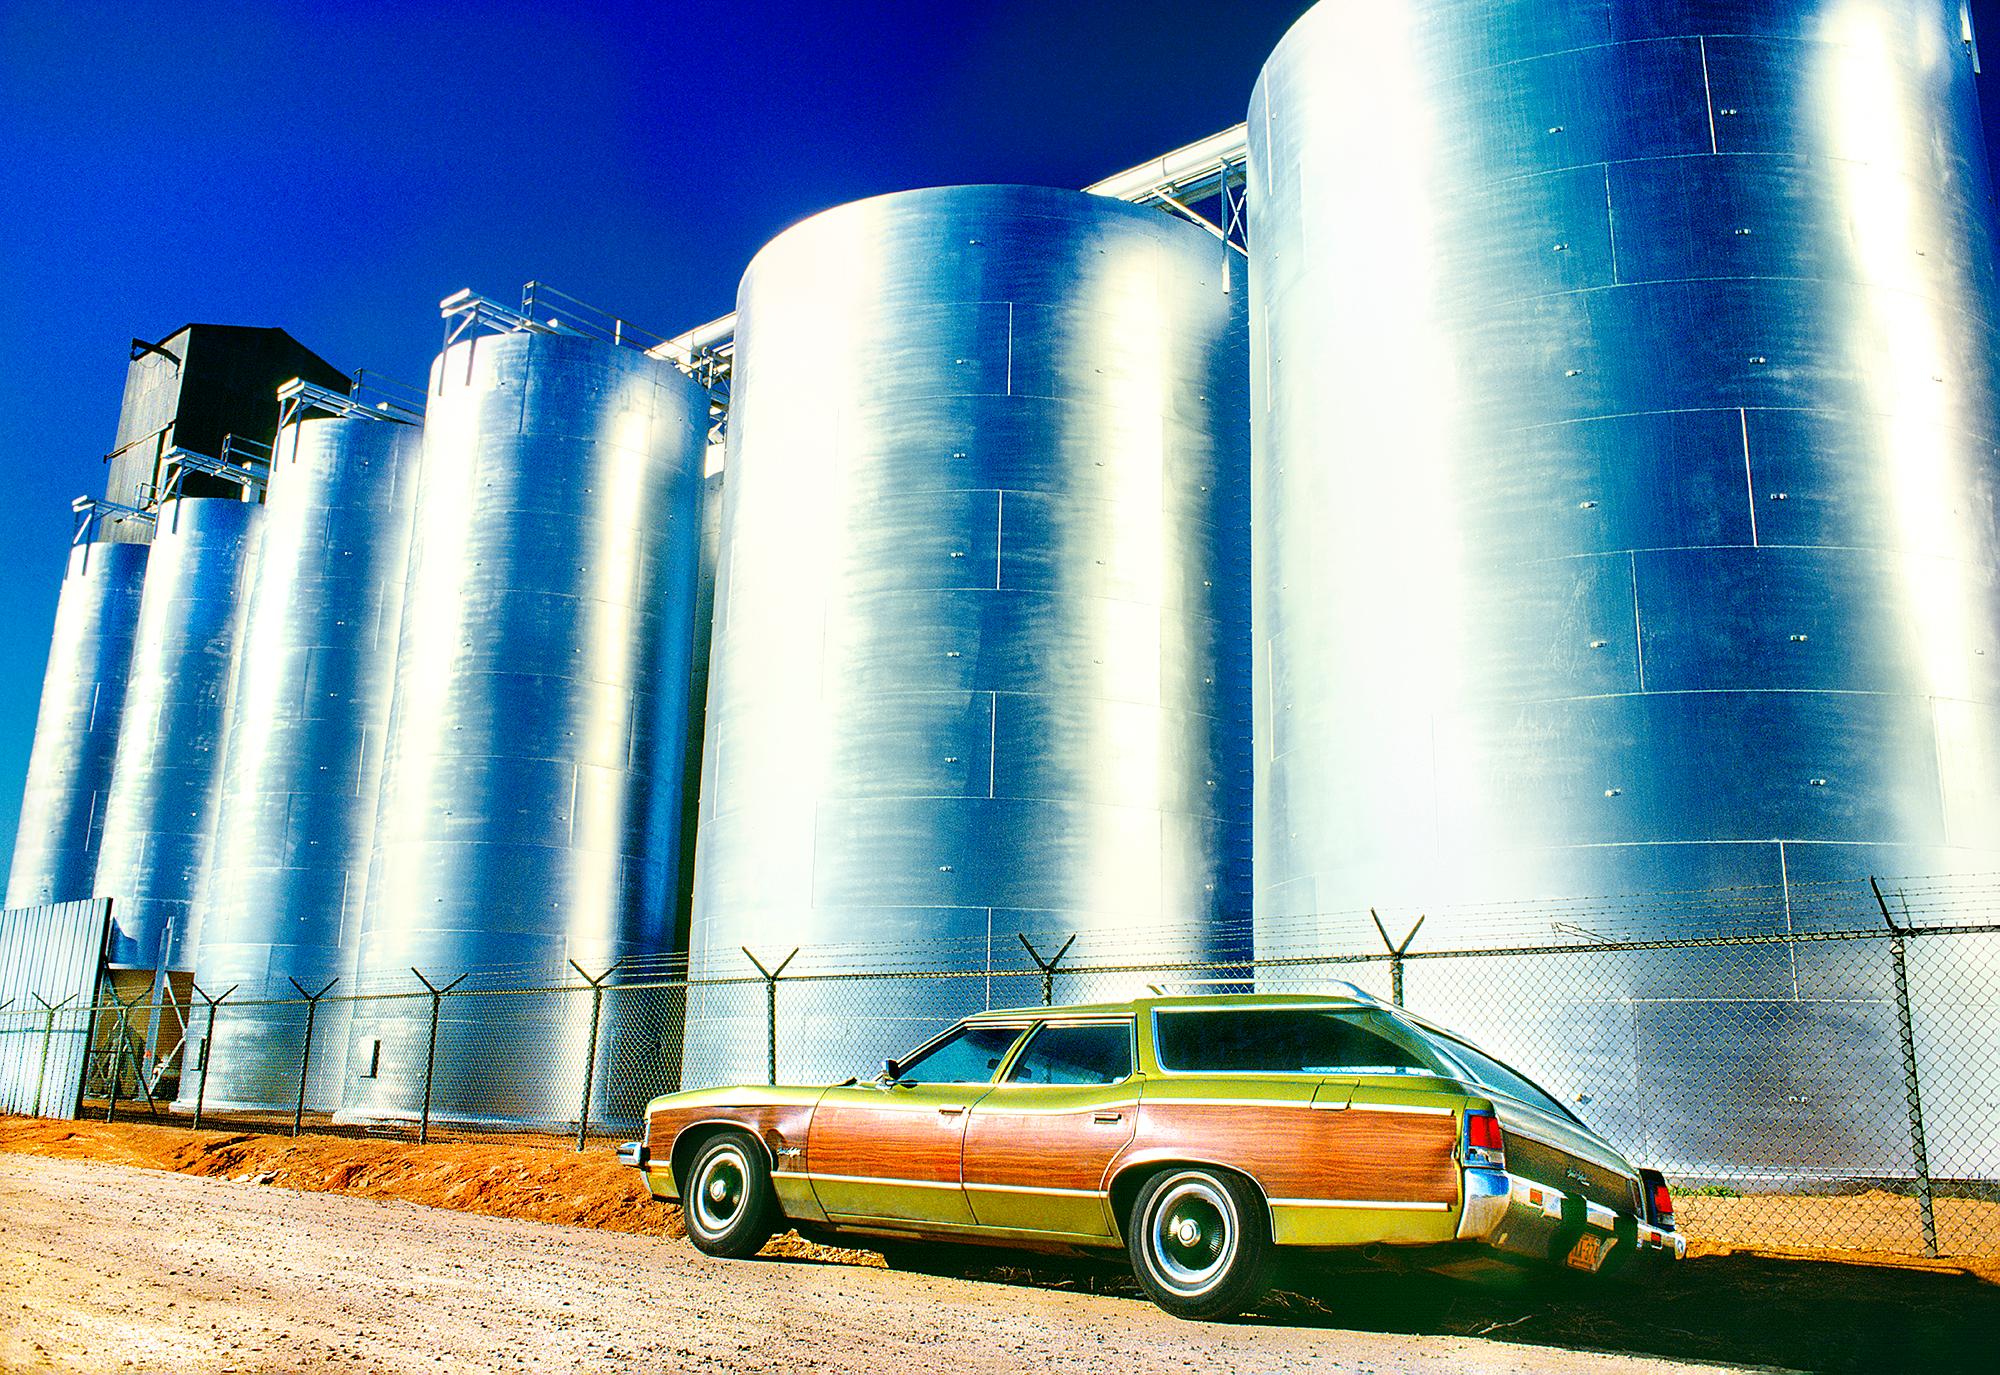 Silver Silos and Station Wagon, Abstract Photography by Mitchell Funk 